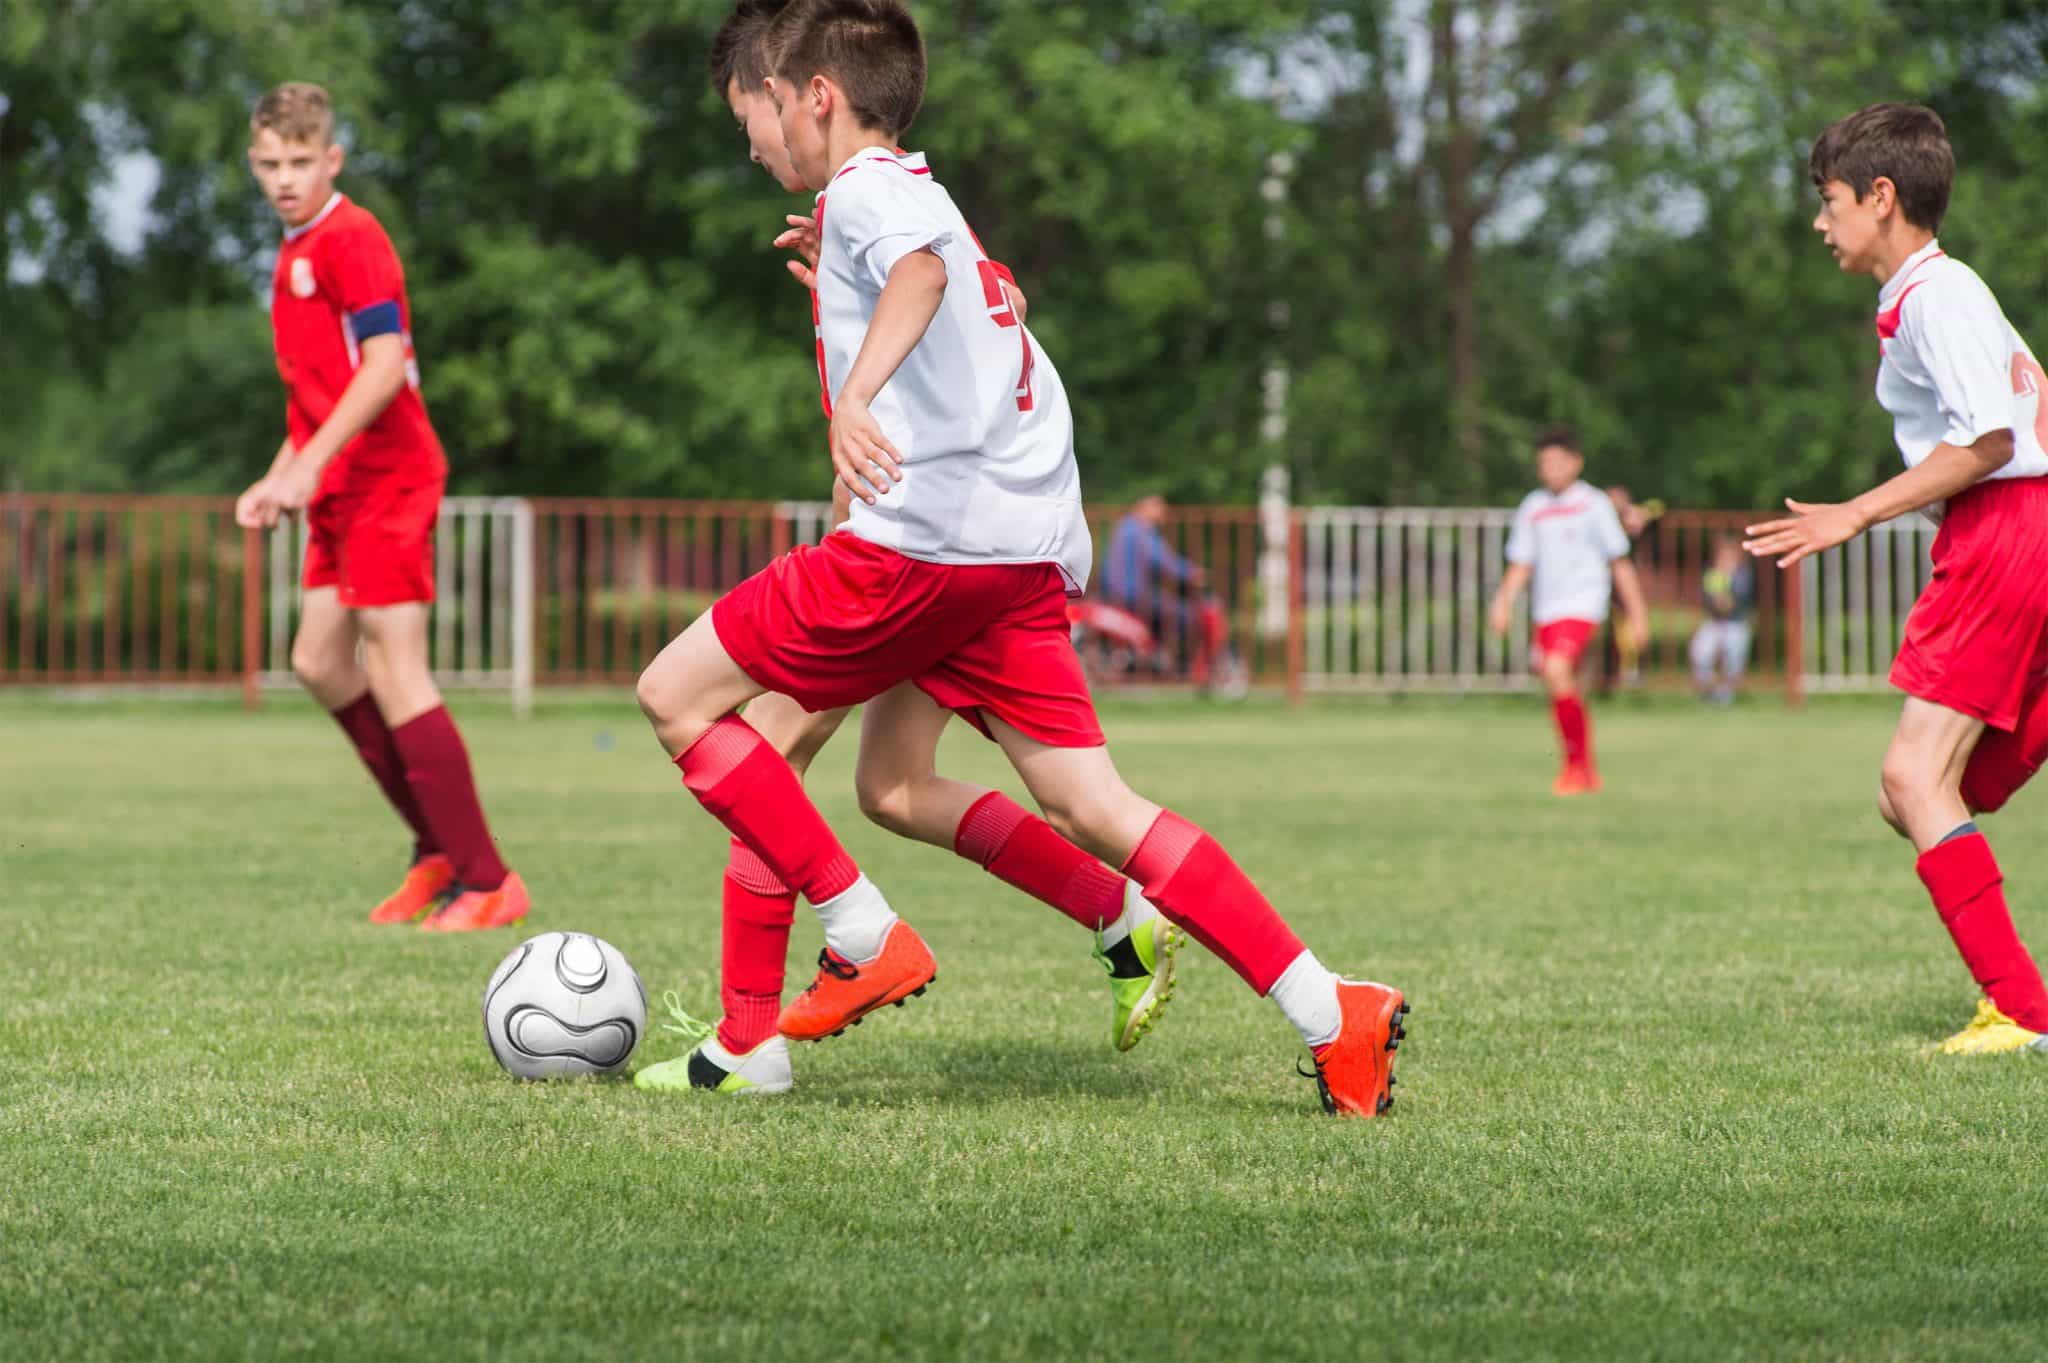 How to Play Soccer - A Soccer Player's Complete Guide To The Game